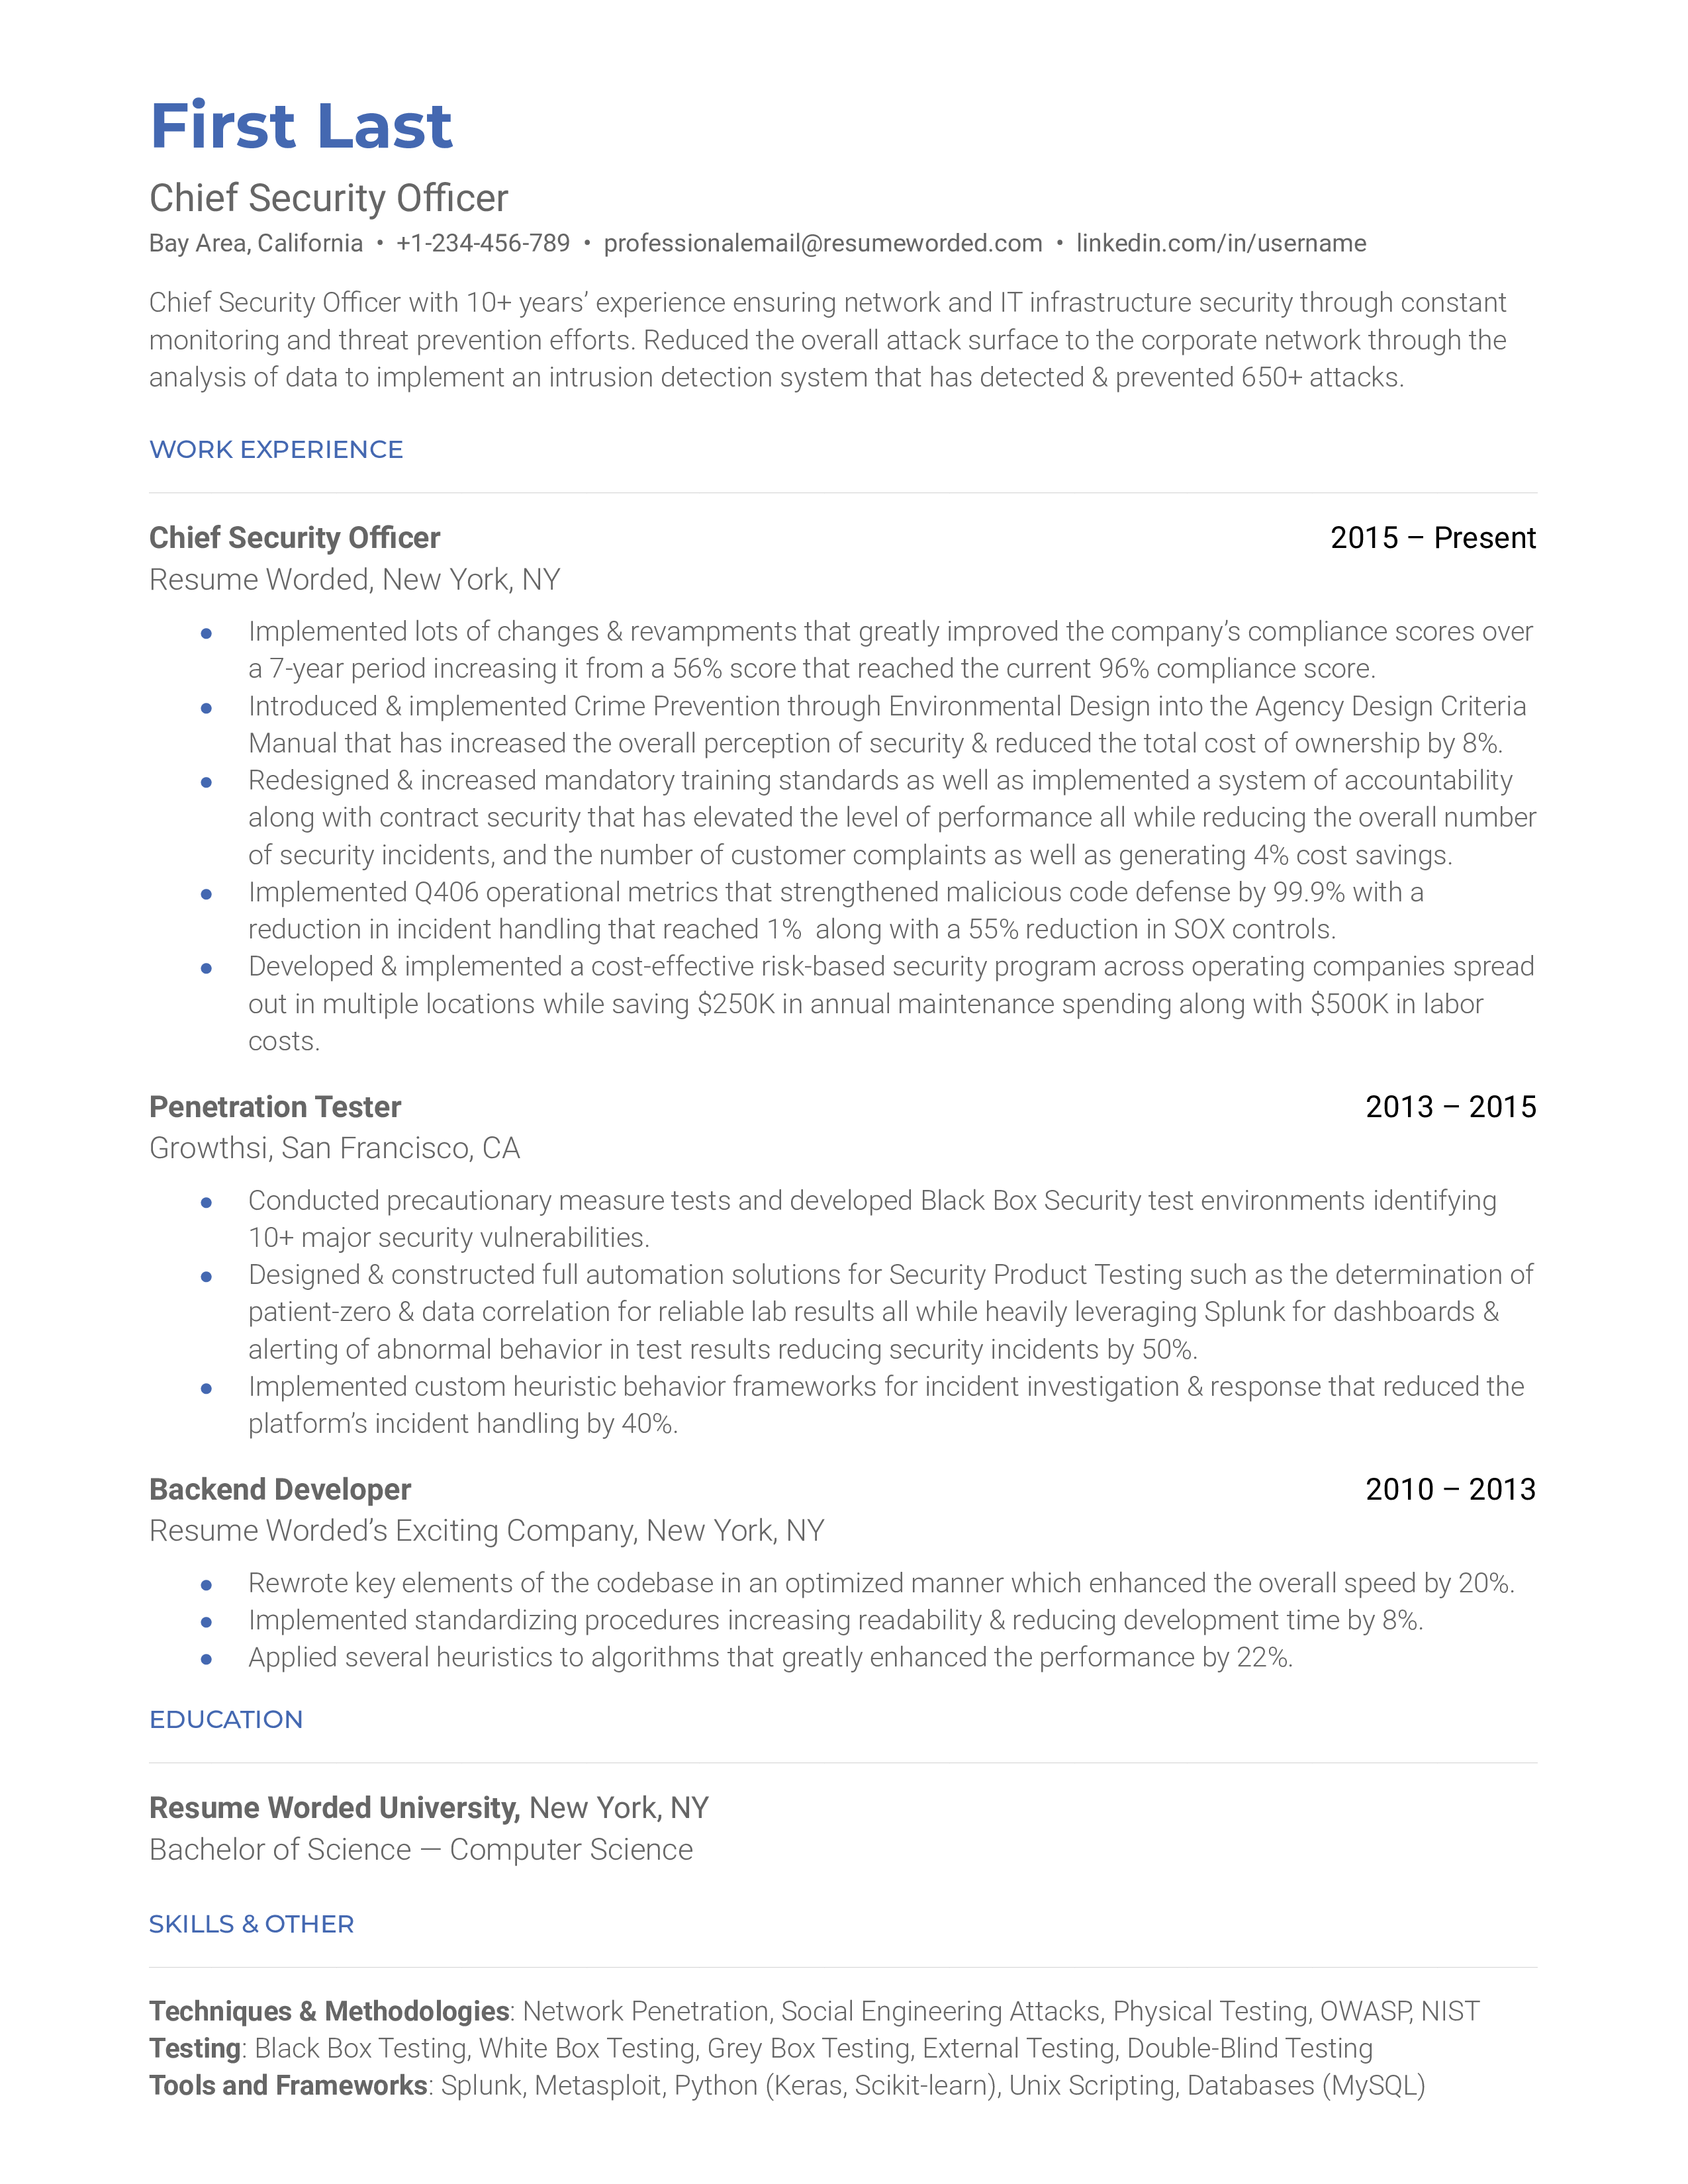 A CV screenshot for a Chief Security Officer position.